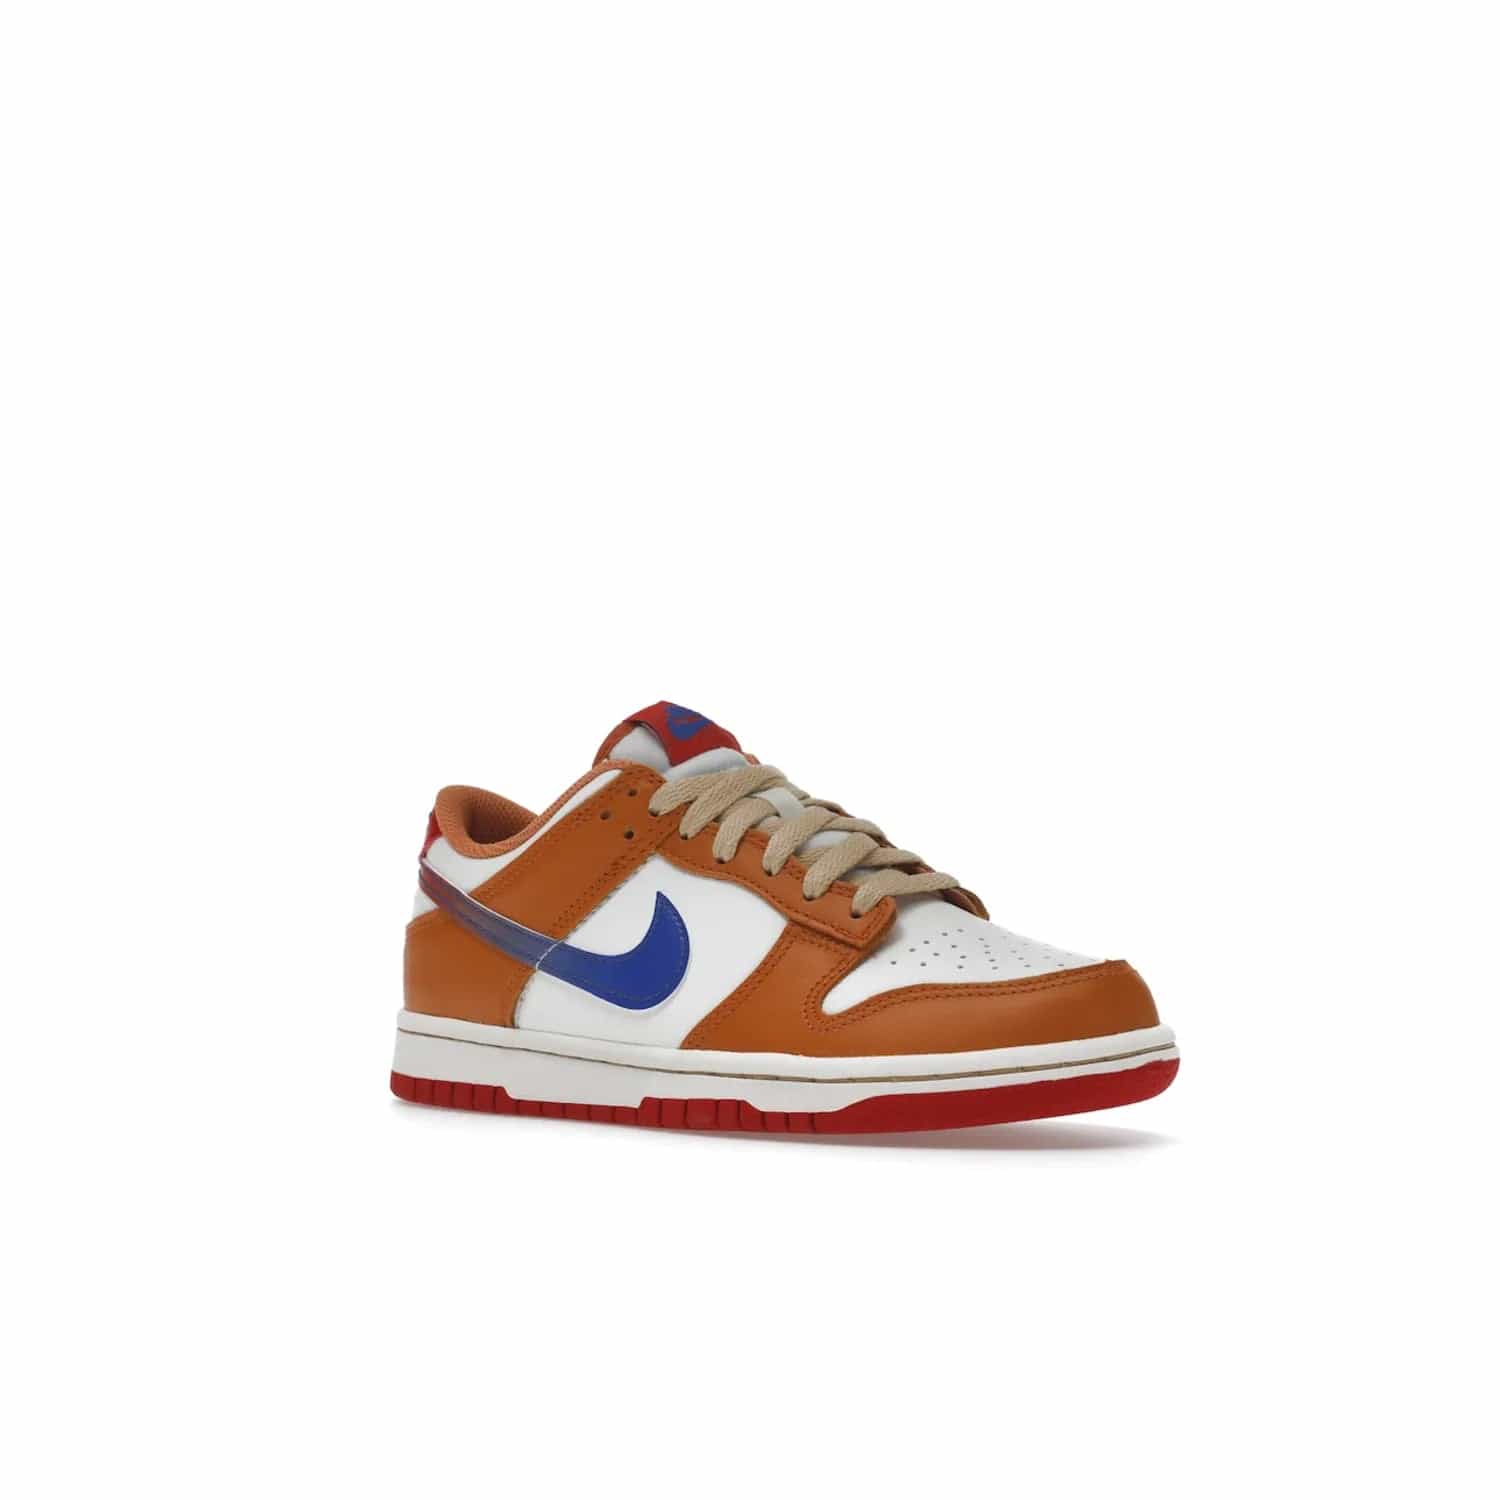 Nike Dunk Low Hot Curry Game Royal (GS) - Image 5 - Only at www.BallersClubKickz.com - Shop the Nike Dunk Low Hot Curry Game Royal GS and rock a classic color scheme to represent the New York Knicks. Featuring a smooth leather upper, retro Nike branding and a low cut collar and rubber cup sole for comfort and protection. Get yours on September 7 at $85.